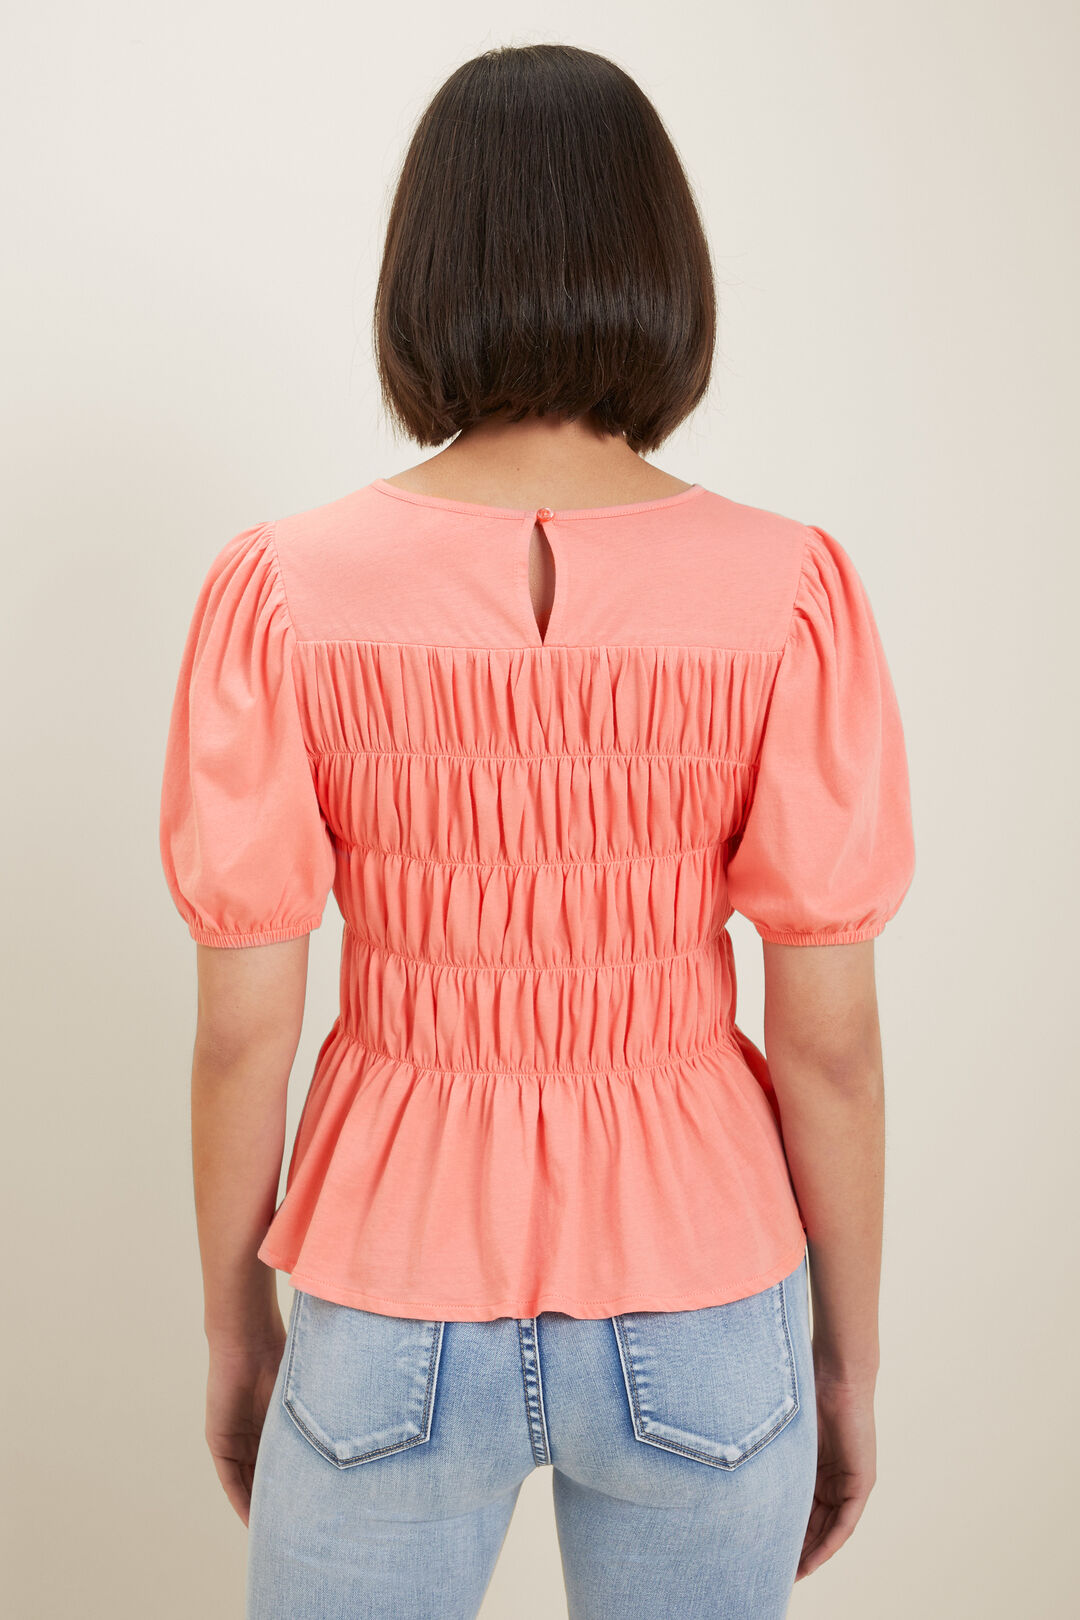 Ruched Bodice Tee  Coral Rose  hi-res